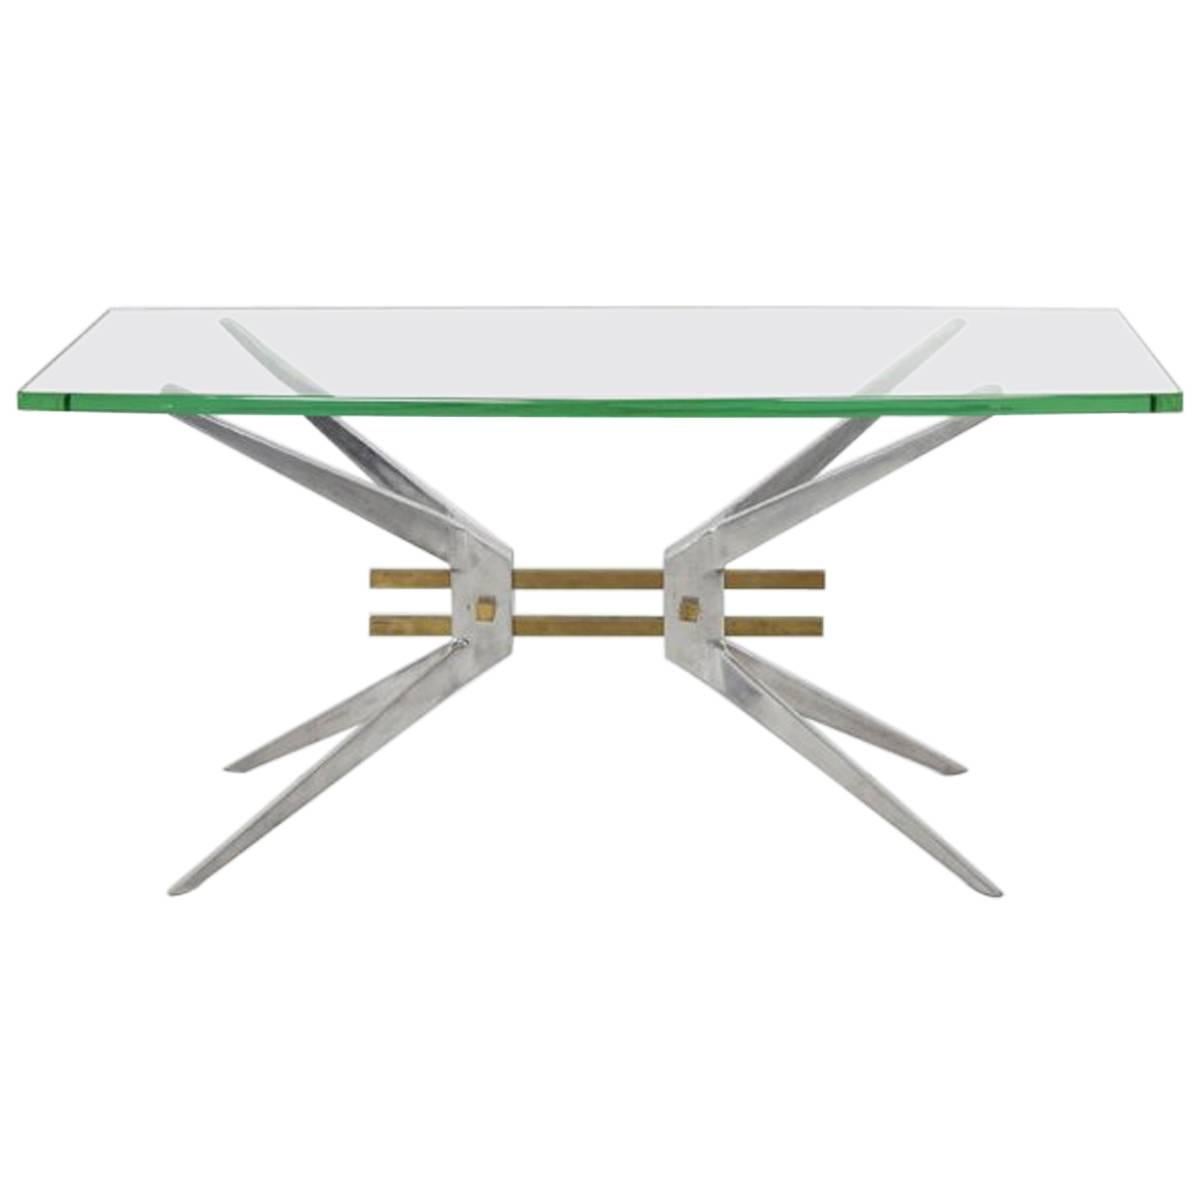 Italian Sofa Table with Aluminum Base and Glass top, 1960s